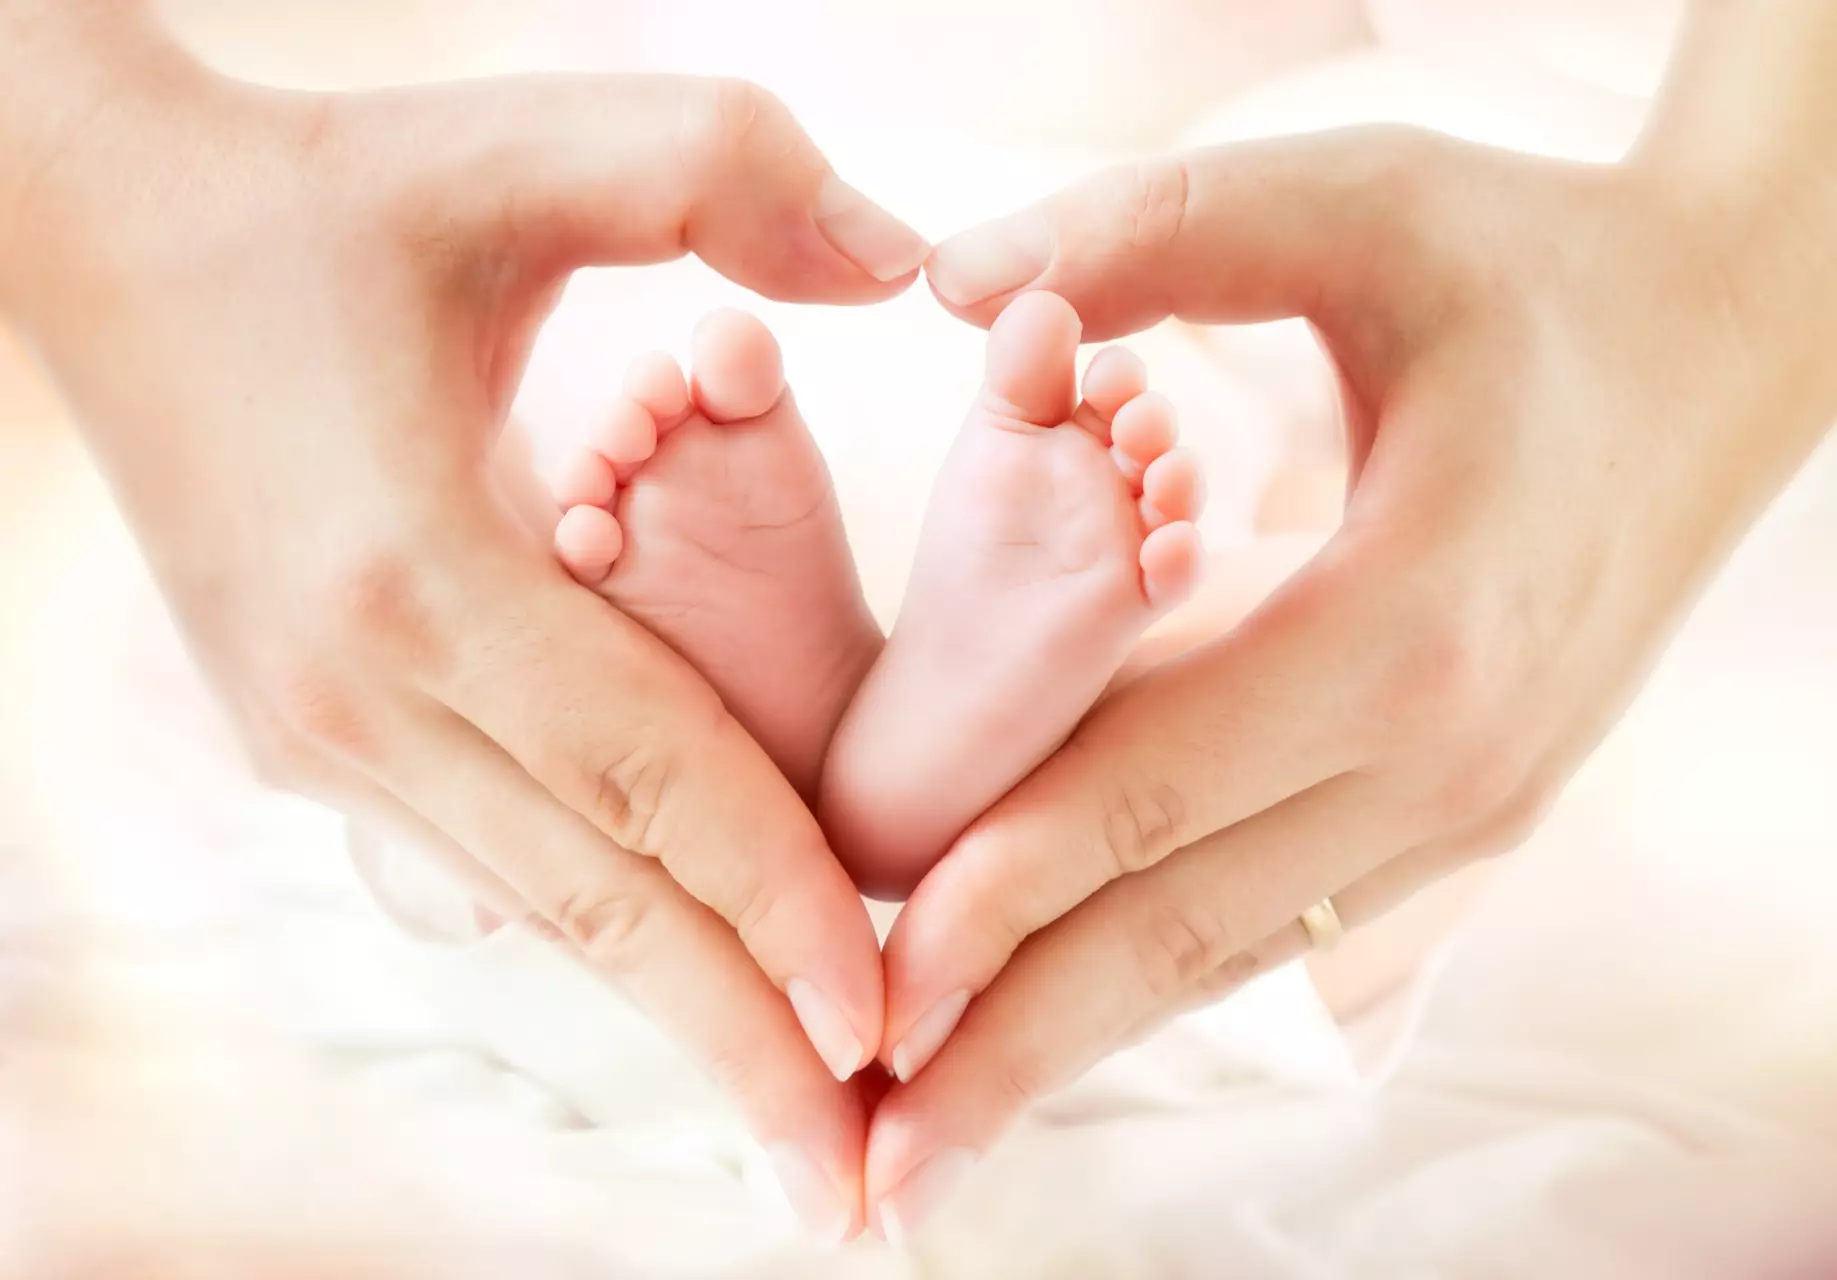 Two hands pressed together to make the shape of a heart. Inside the heart are a baby's two feet.